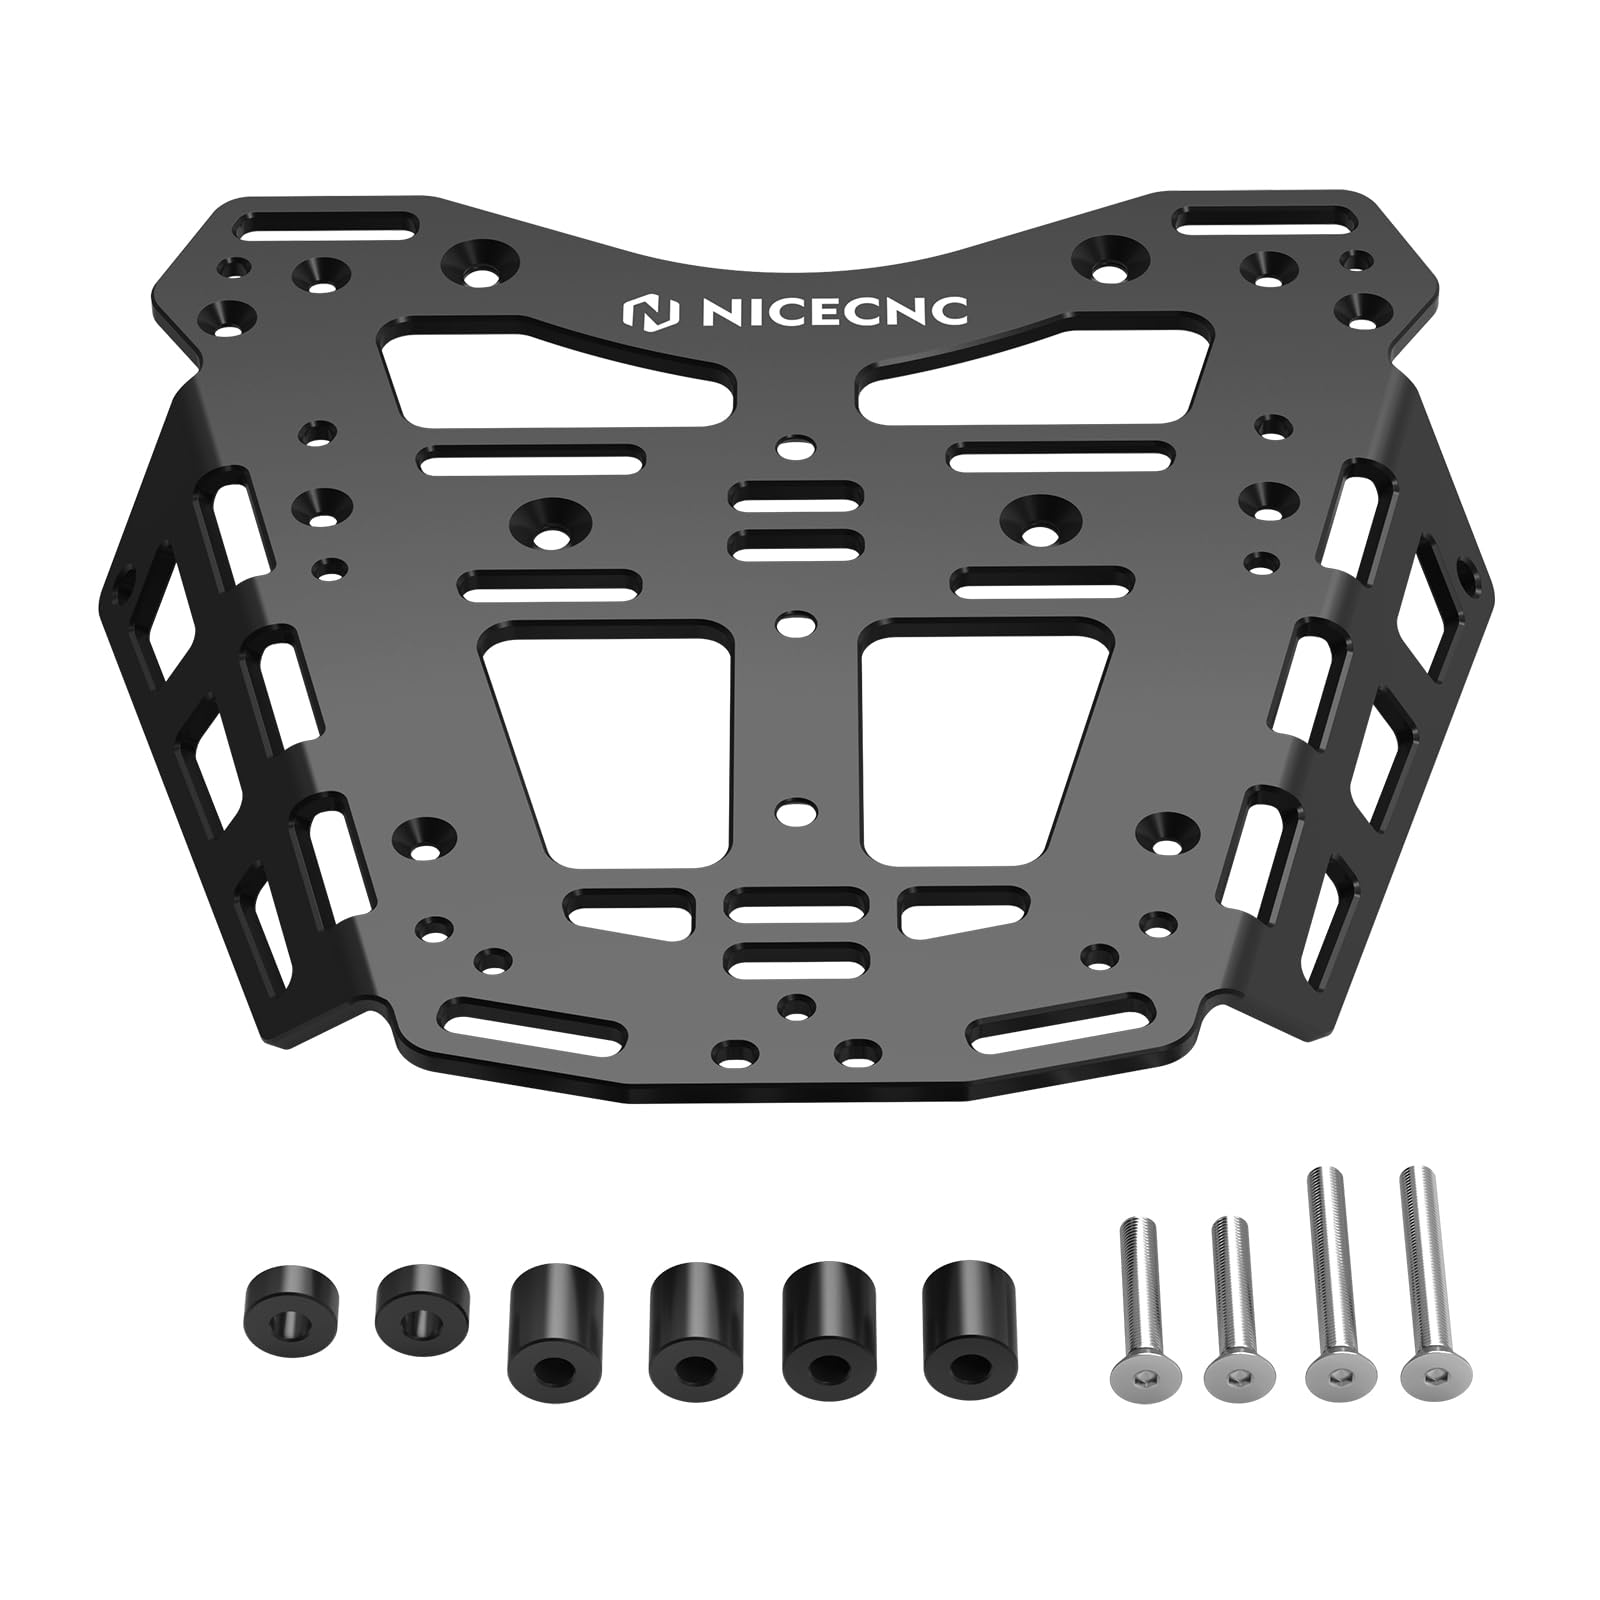 NICECNC Rear Luggage Rack Compatible with Husqvarna Norden 901 2022 2023,26 Slots-Strapping Points,Strap-Friendly,Glatte Kanten,6061 Aluminum,CNC Laser Cutting,for Rack-Less,Soft,Tool,Small Roll Bags von NICECNC